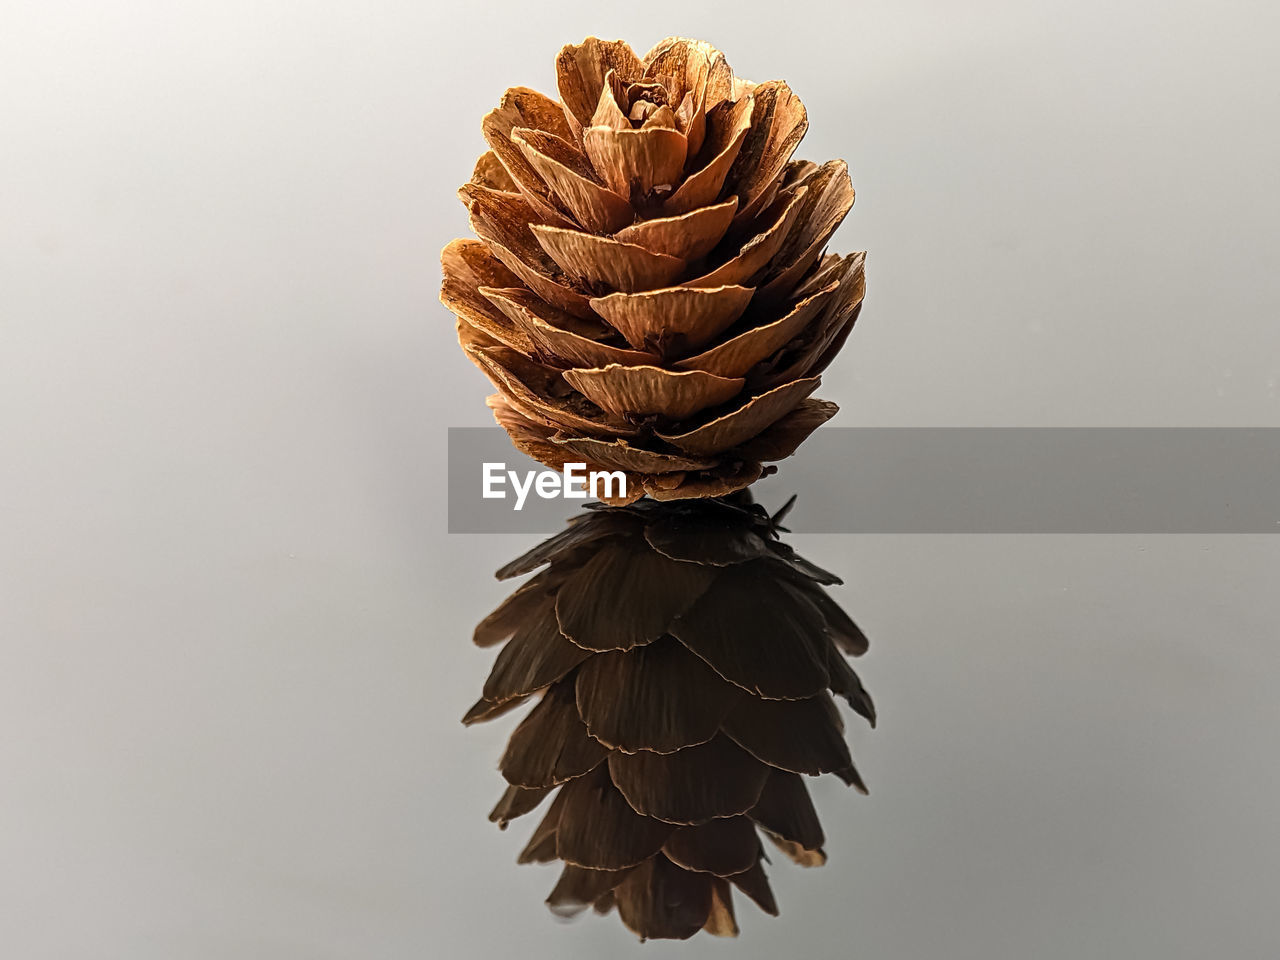 conifer cone, leaf, tree, close-up, flower, branch, no people, studio shot, pine cone, nature, plant, indoors, brown, macro photography, twig, gray background, gray, copy space, beauty in nature, still life